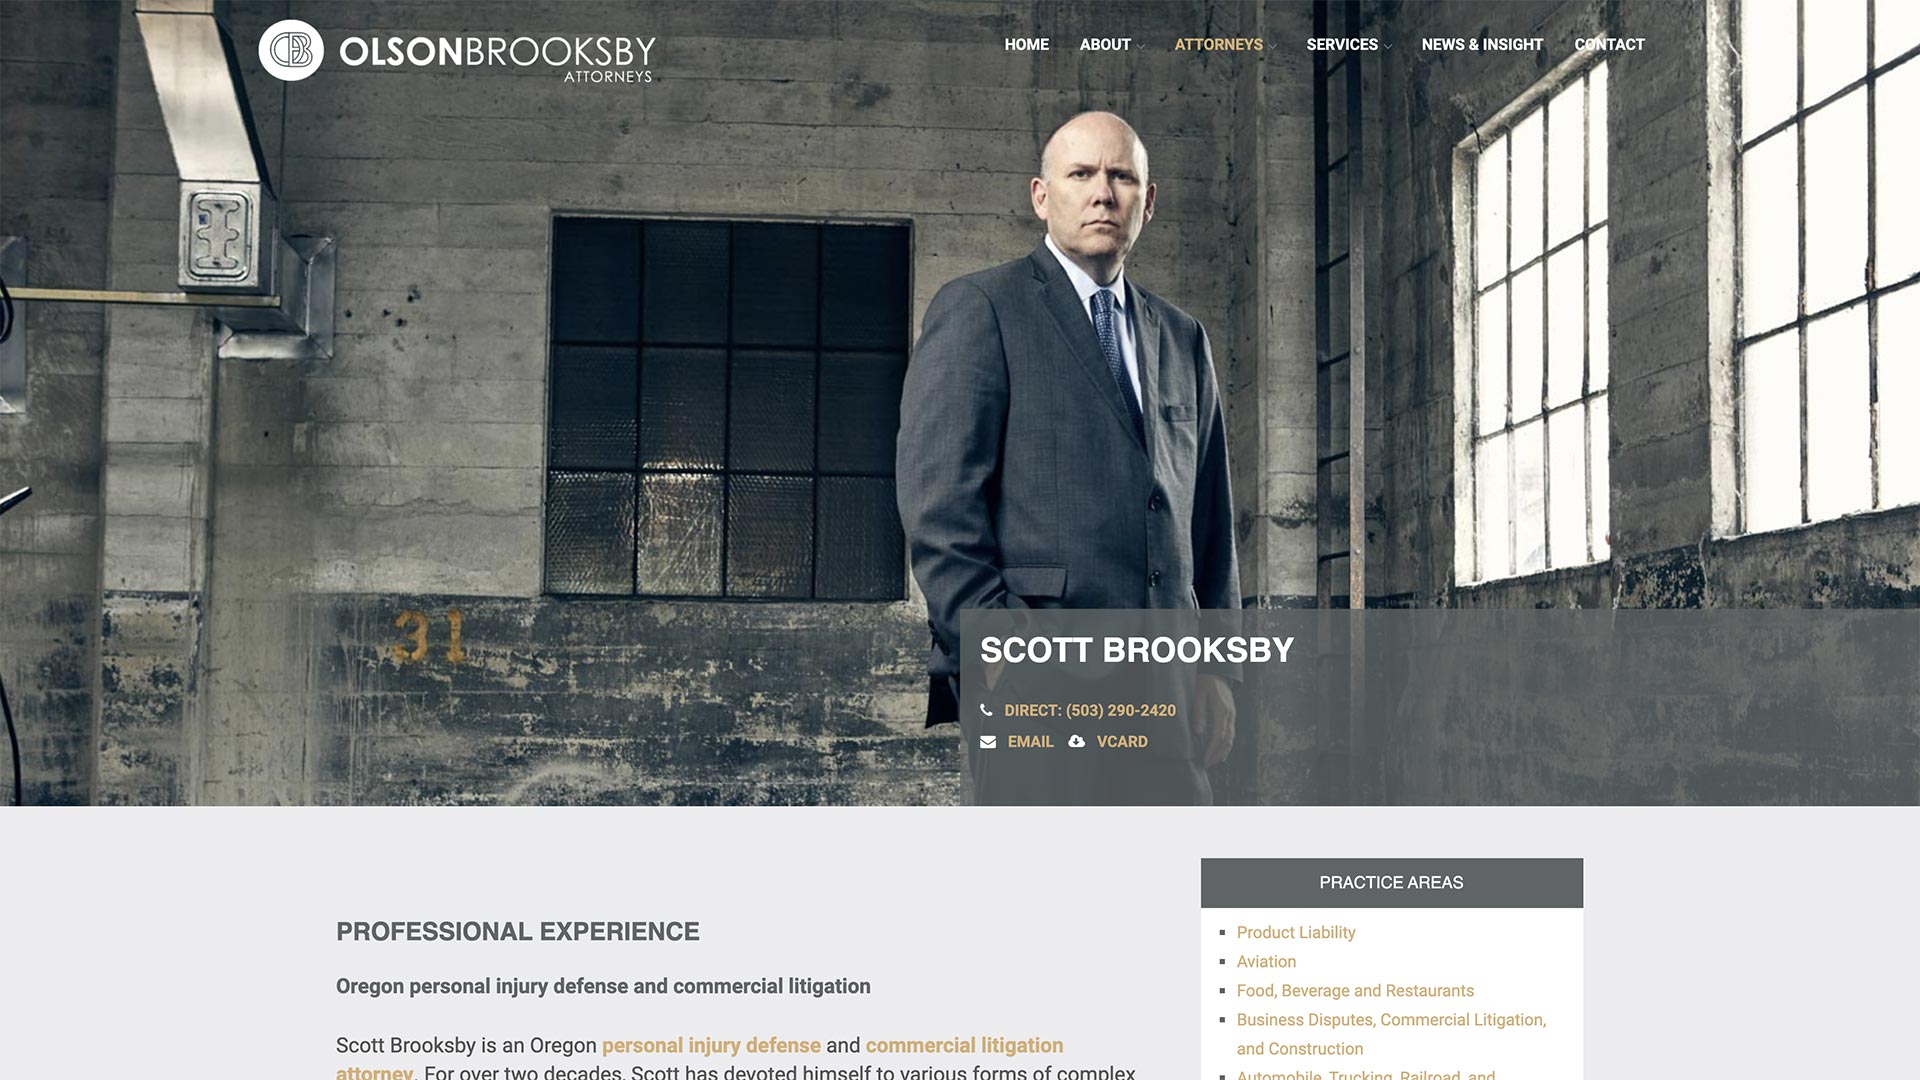 Portland, Oregon Law Firm Website Design Example: Olson Brooksby